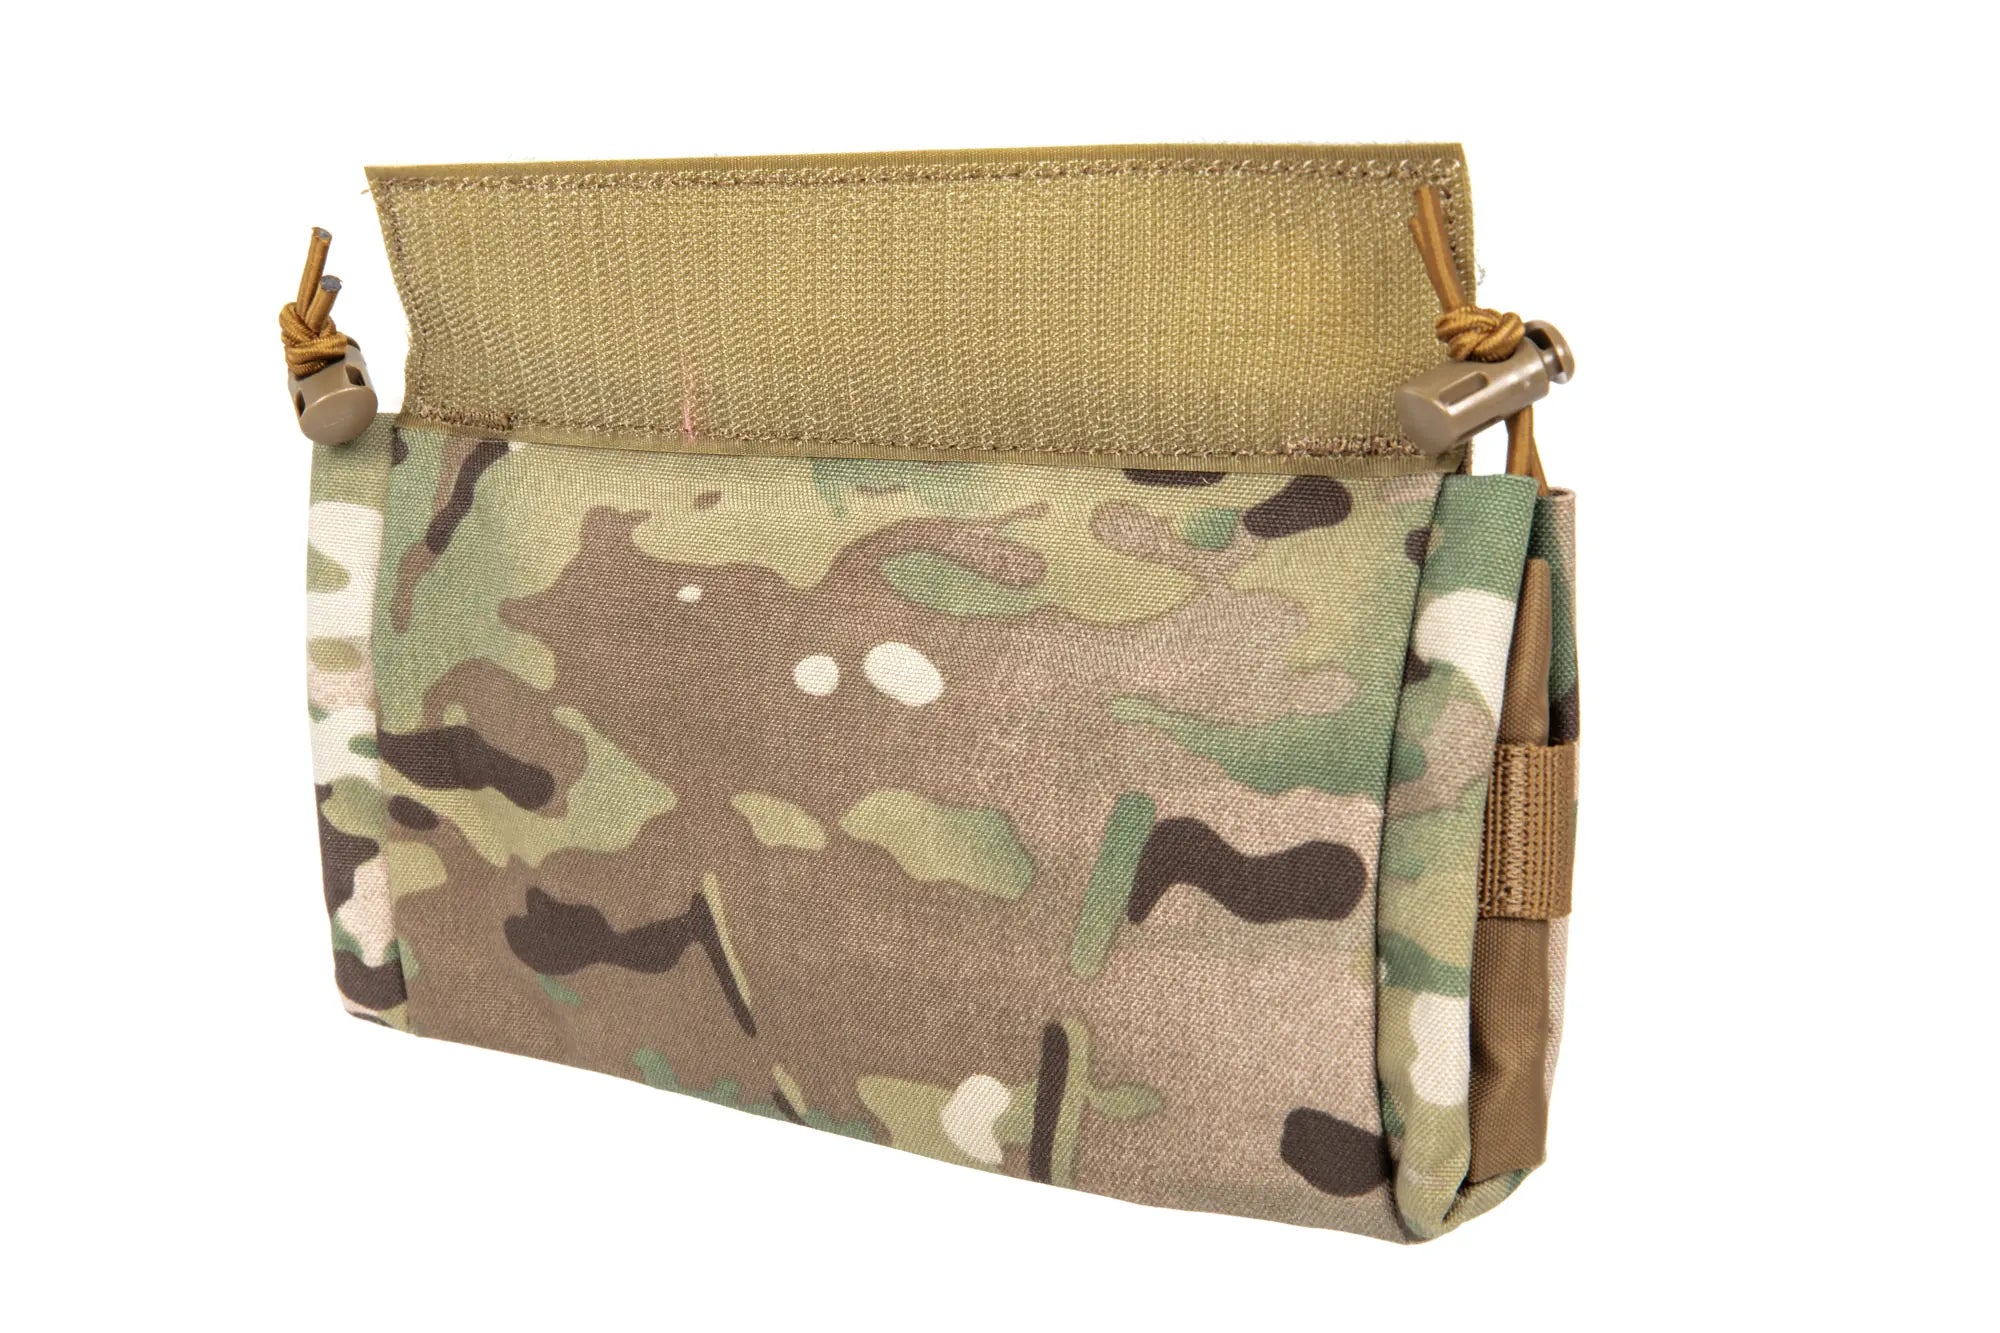 Tactical first aid kit with sleeve Wosport Multicam-2